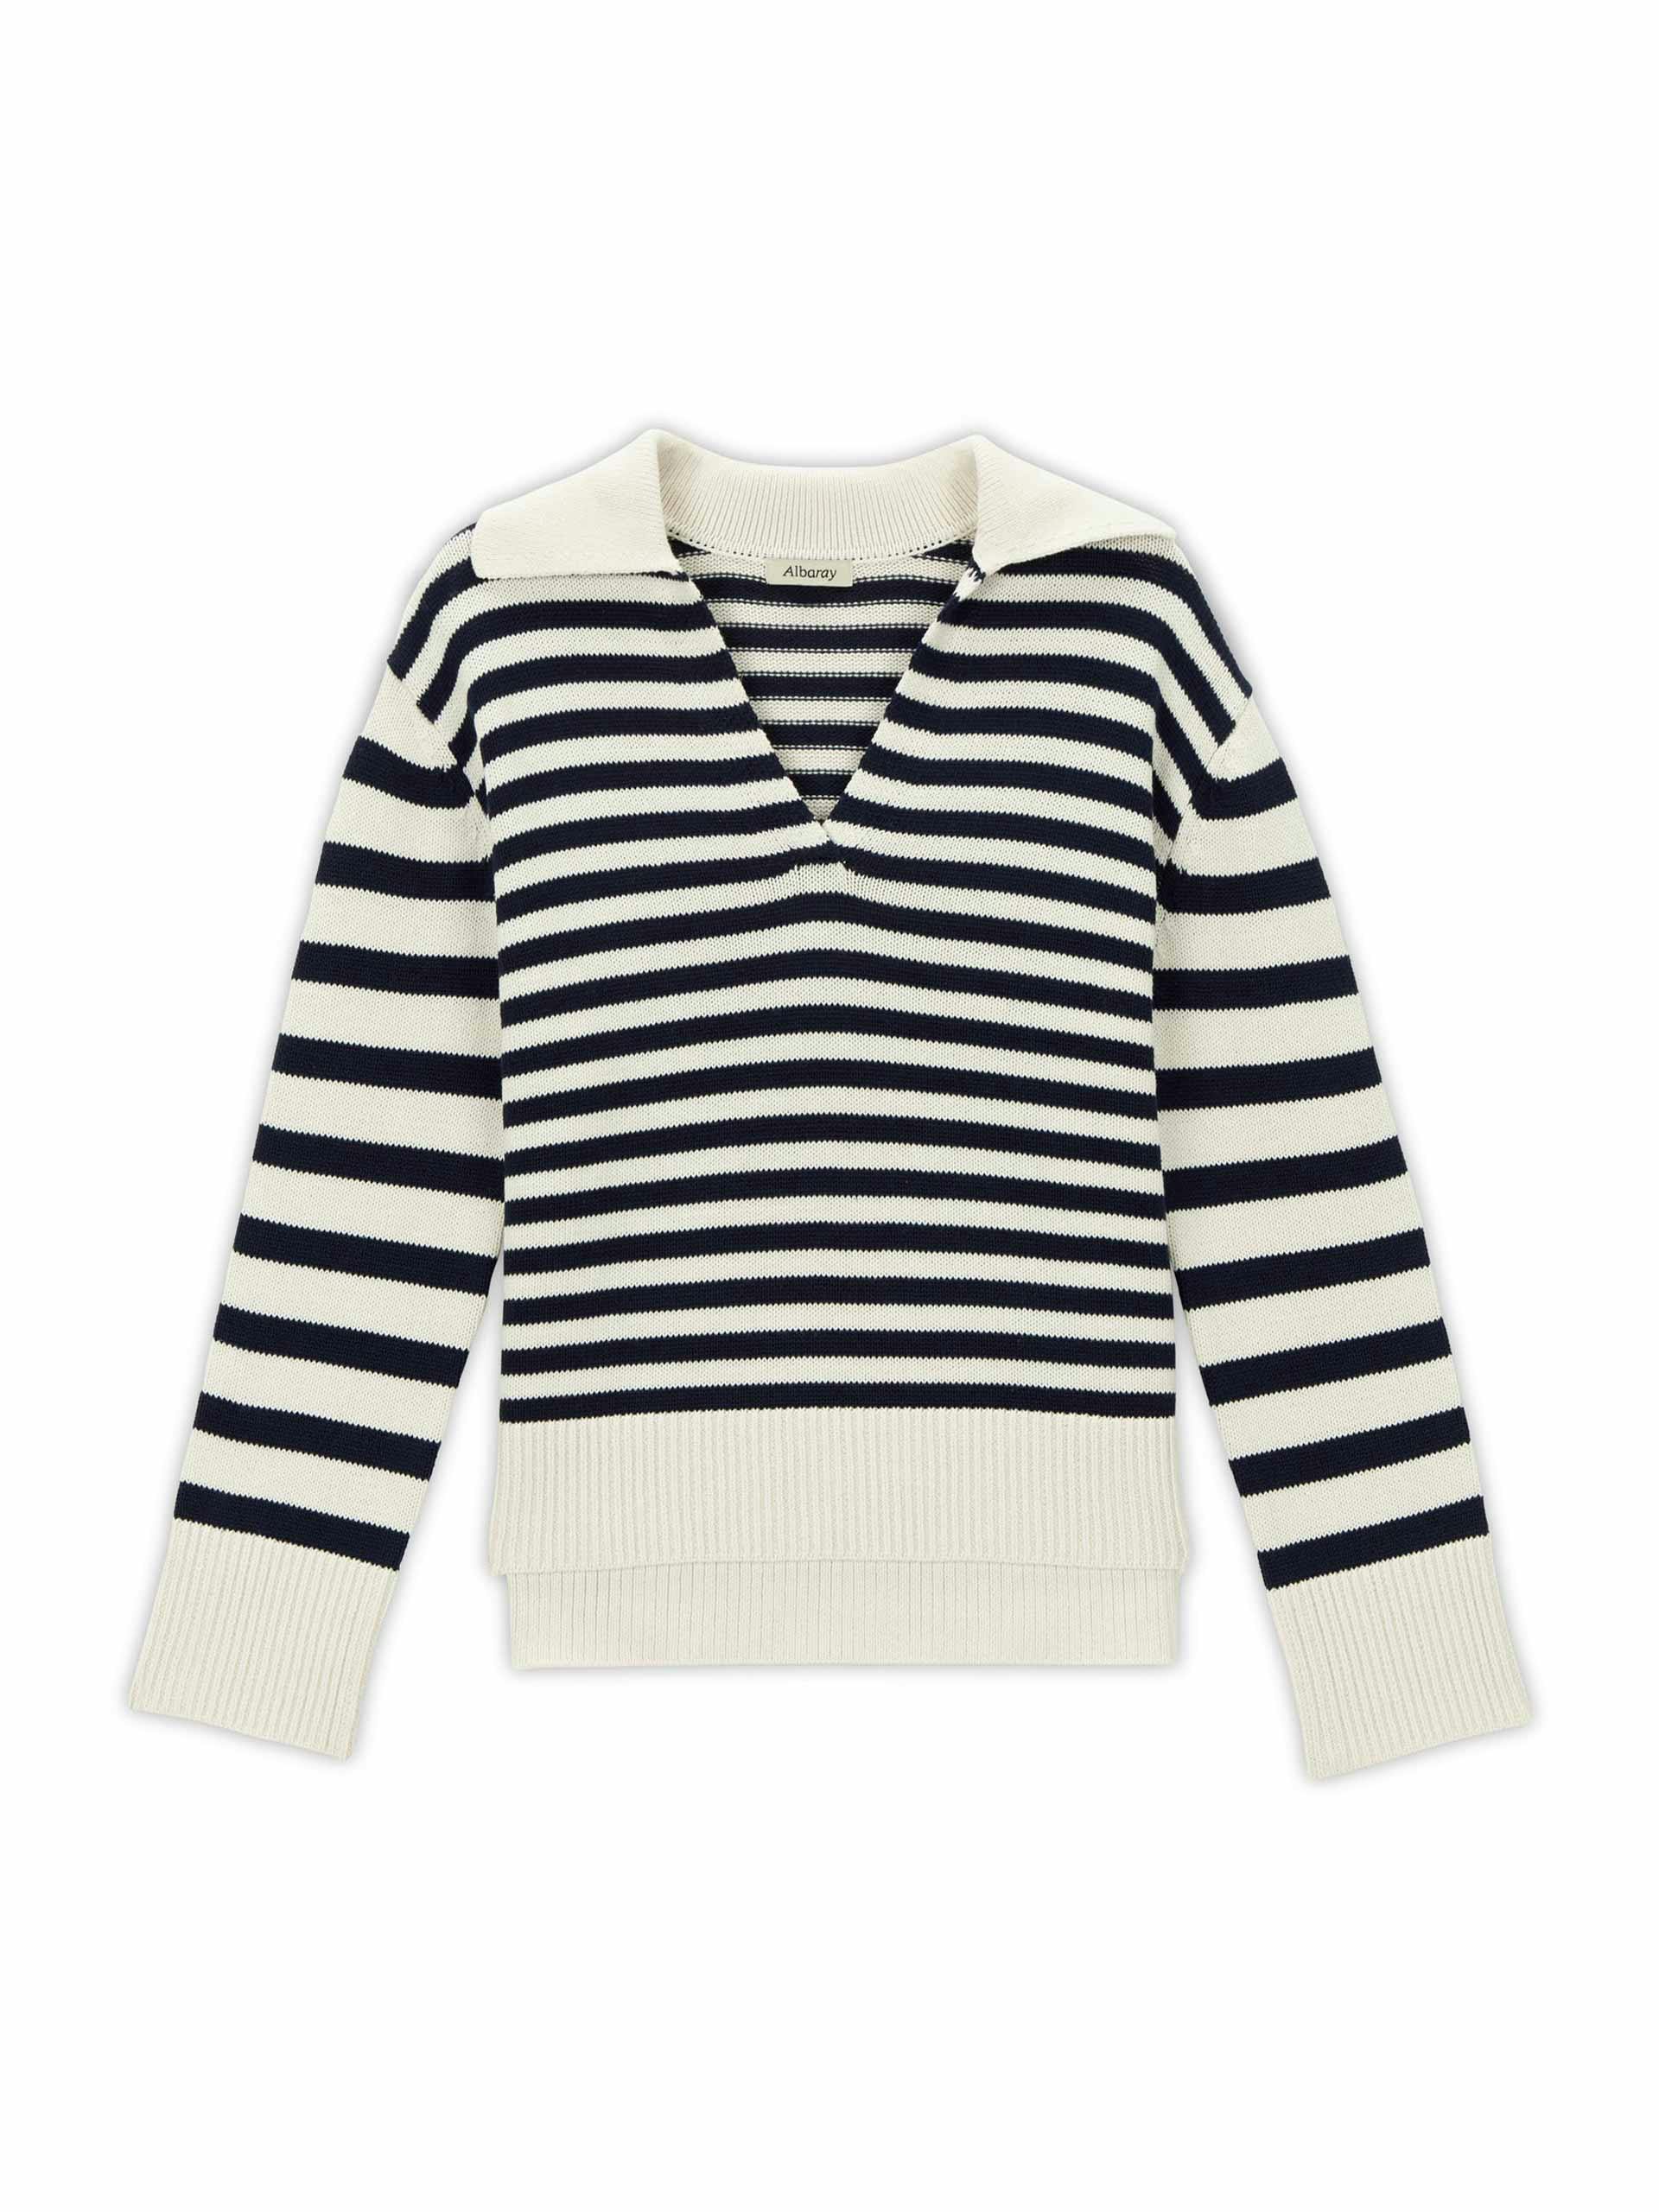 Navy and white knitted jumper